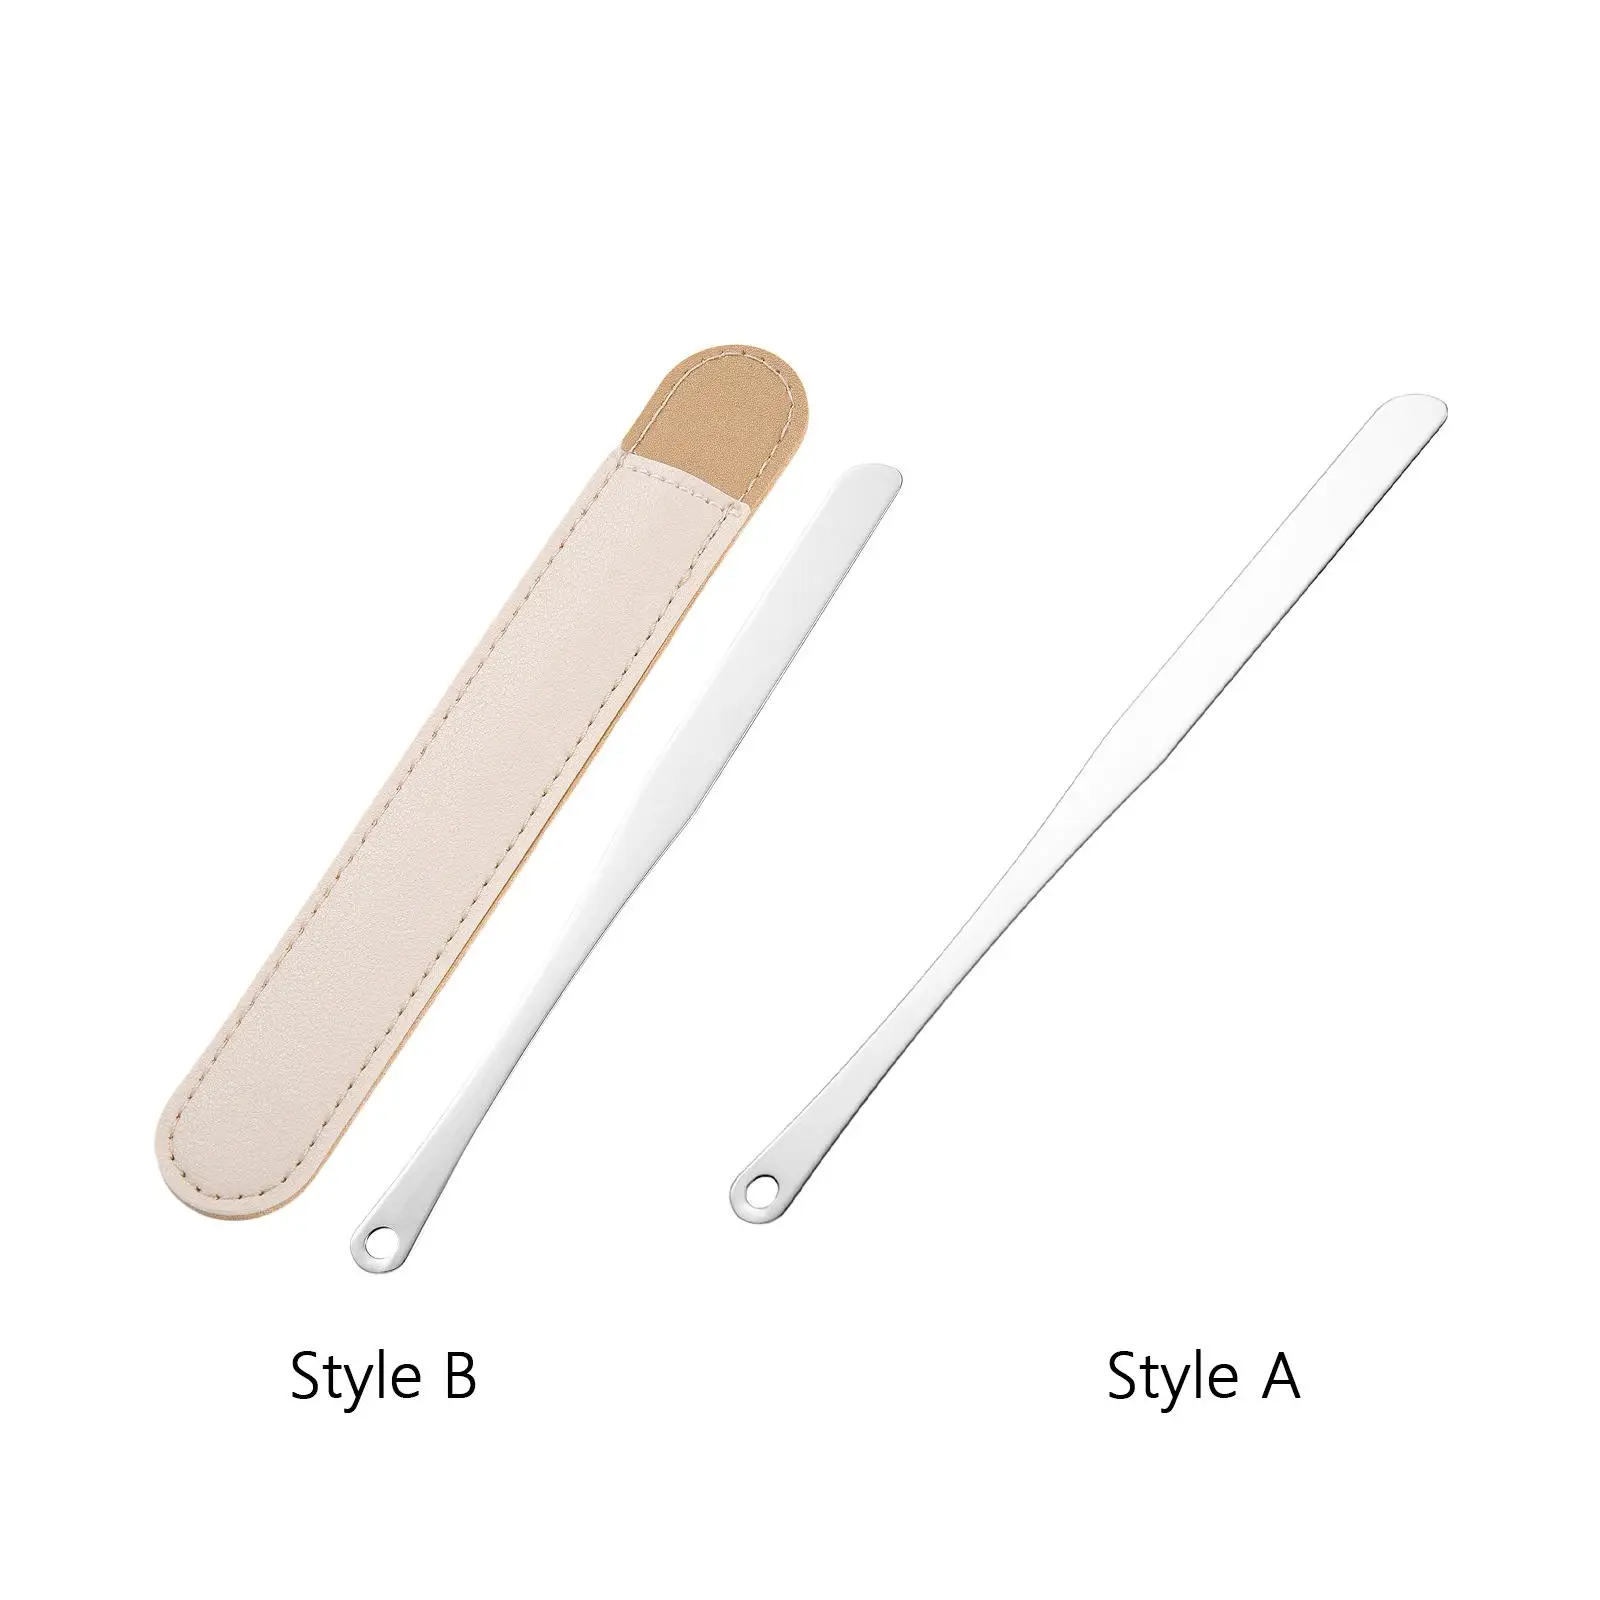 Makeup Spatulas Nail Art Tool Stainless Steel Accessories Cosmetic Mixing Bar Paddle Rod for Foundations Perfect Gifts Beginner